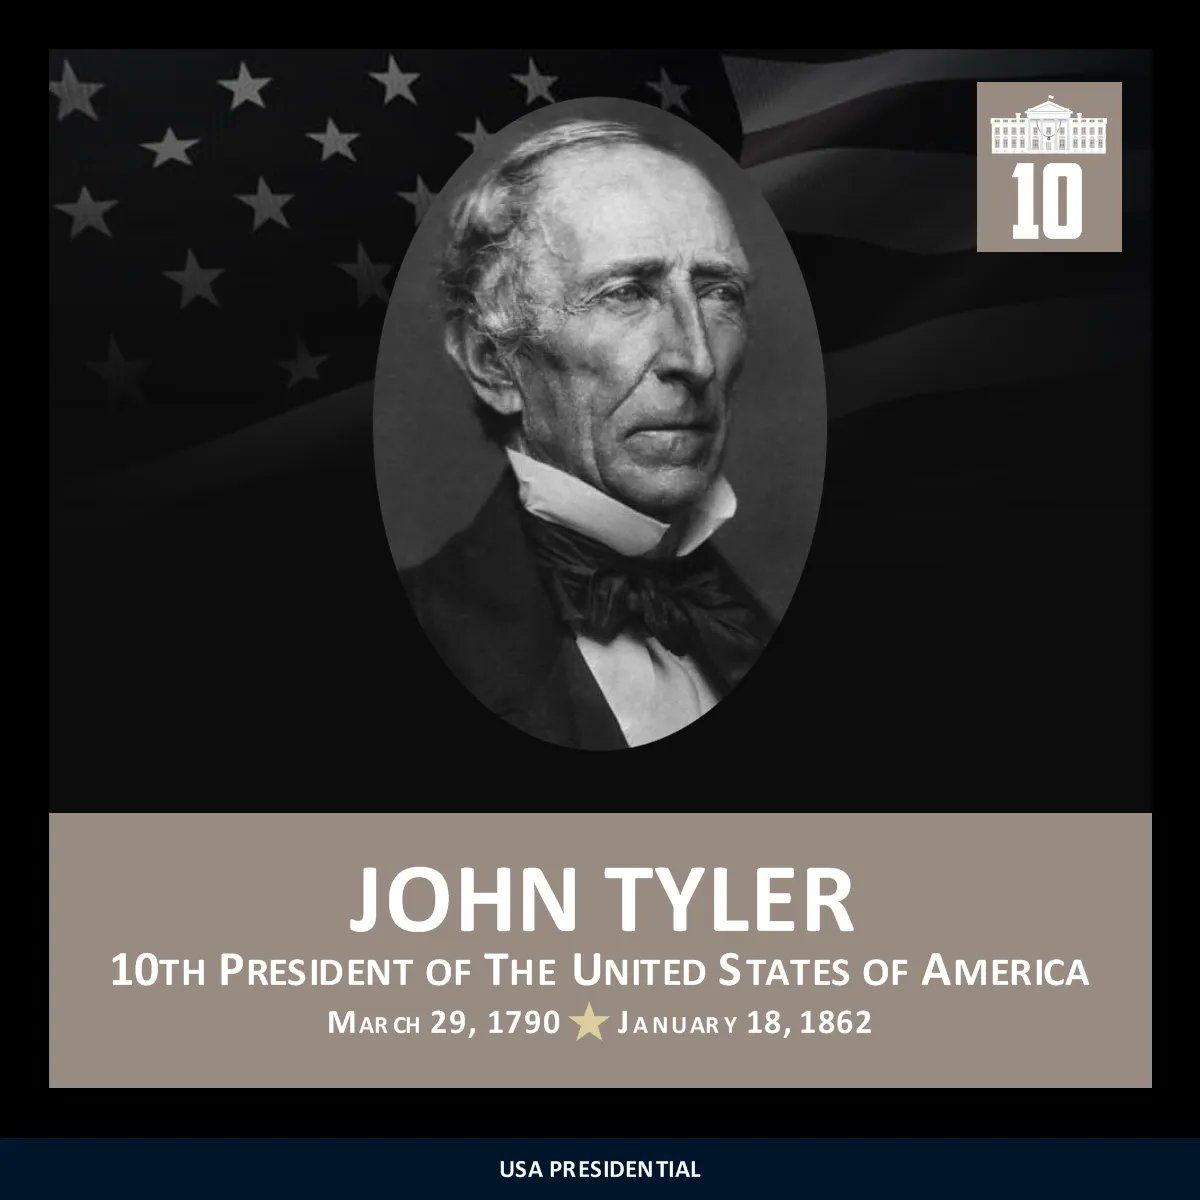 On this day in 1862, John Tyler suffered a stroke and died. He was 71 years old.
----
#usa #america #unitedstates #potus #whitehouse #ovaloffice #president #history #didyouknow #quote #quotes #johntyler #prestyler #usapresidential